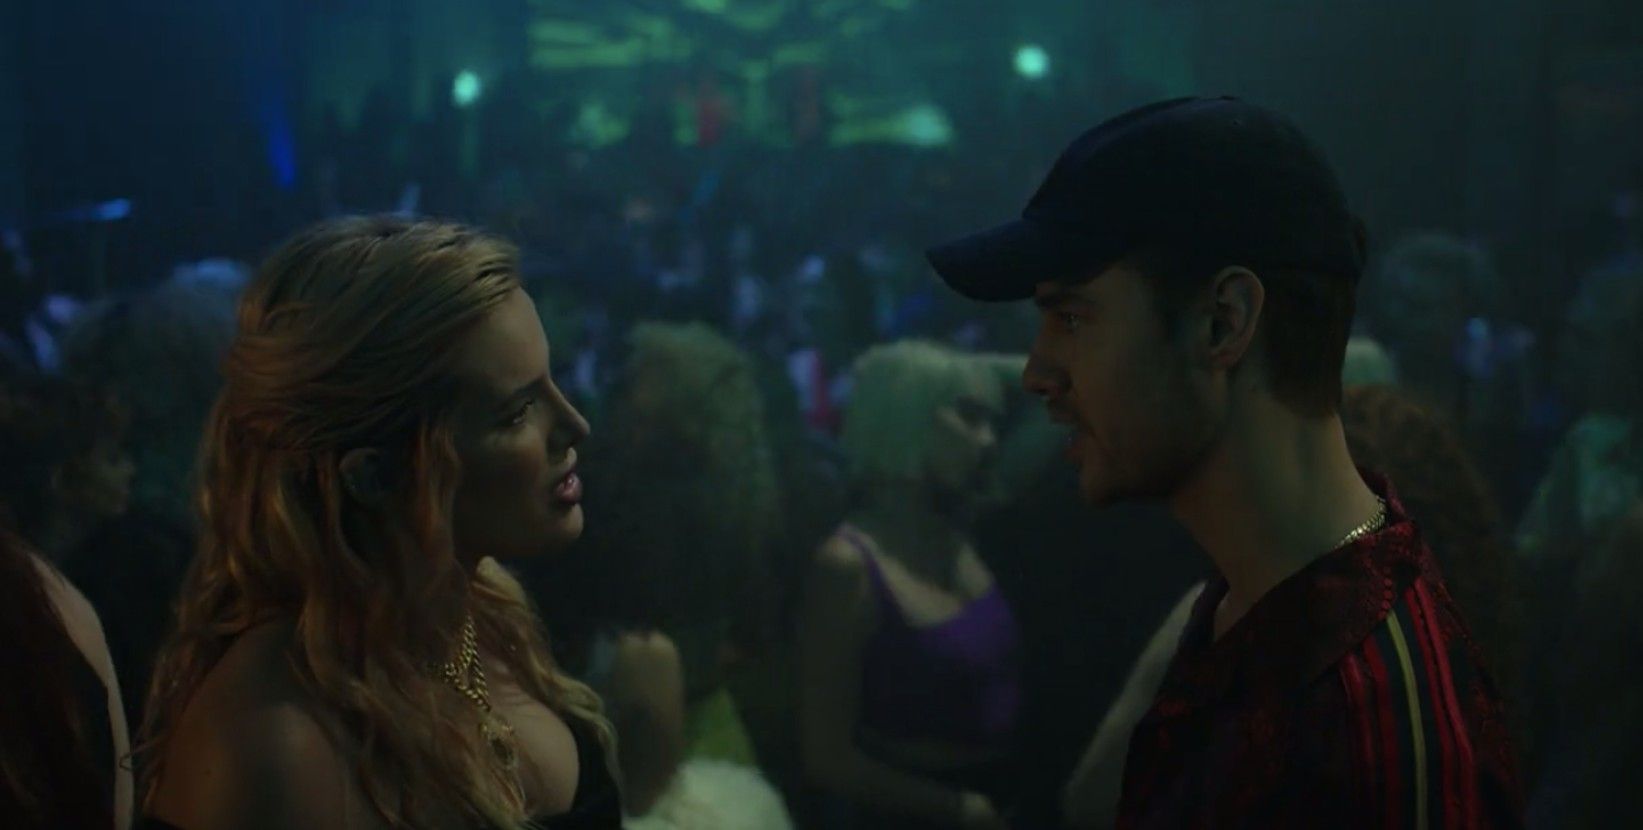 Marci (Bella Thorne) and Chaz (Anthony de la Torre) in a nightclub in American Horror Stories' "Drive"